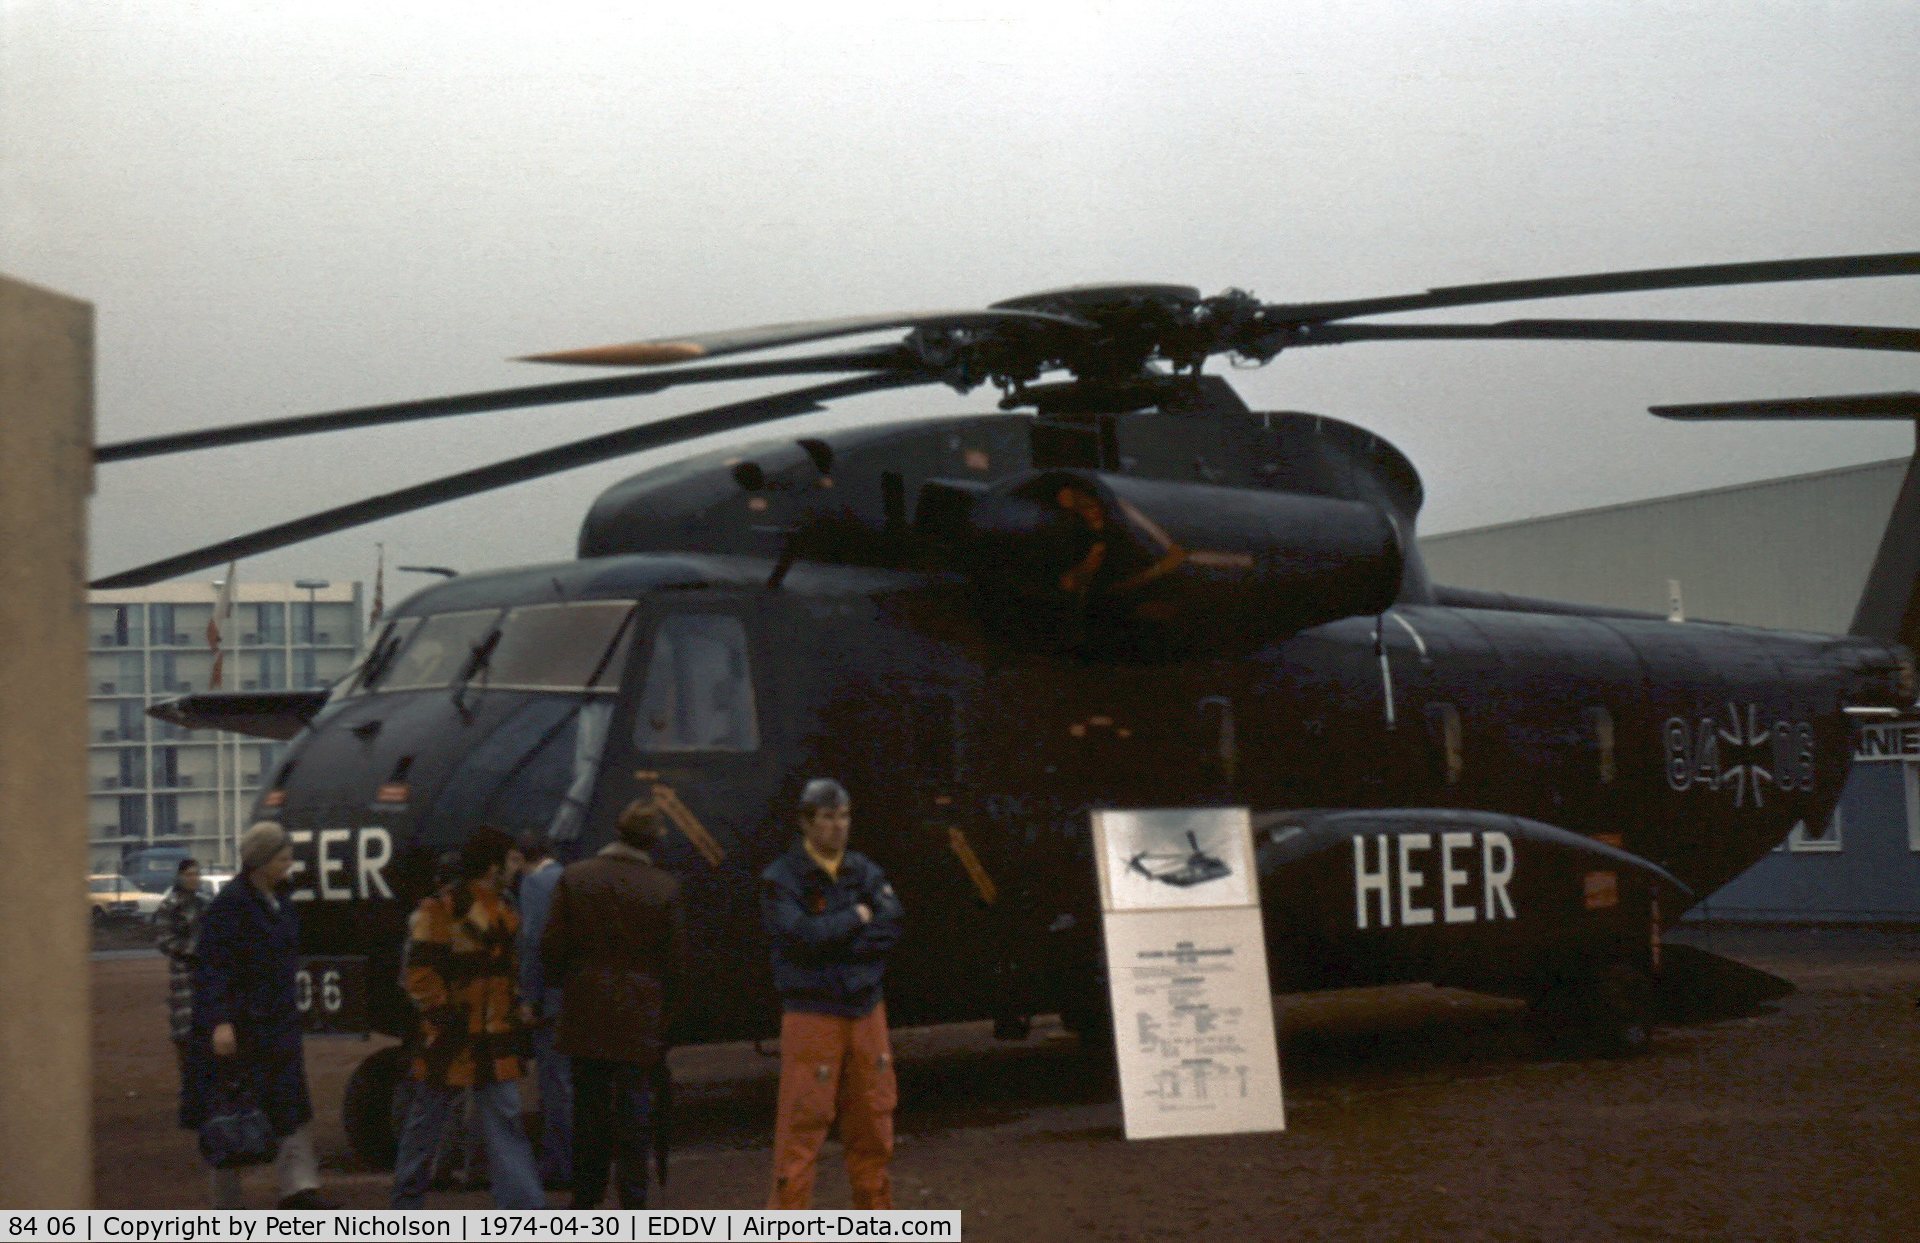 84 06, Sikorsky (VFW-Fokker) CH-53G C/N V65-004, CH-53G of German Army Aviation Weapons School - HFWS - on display at the 1974 Hannover Airshow.